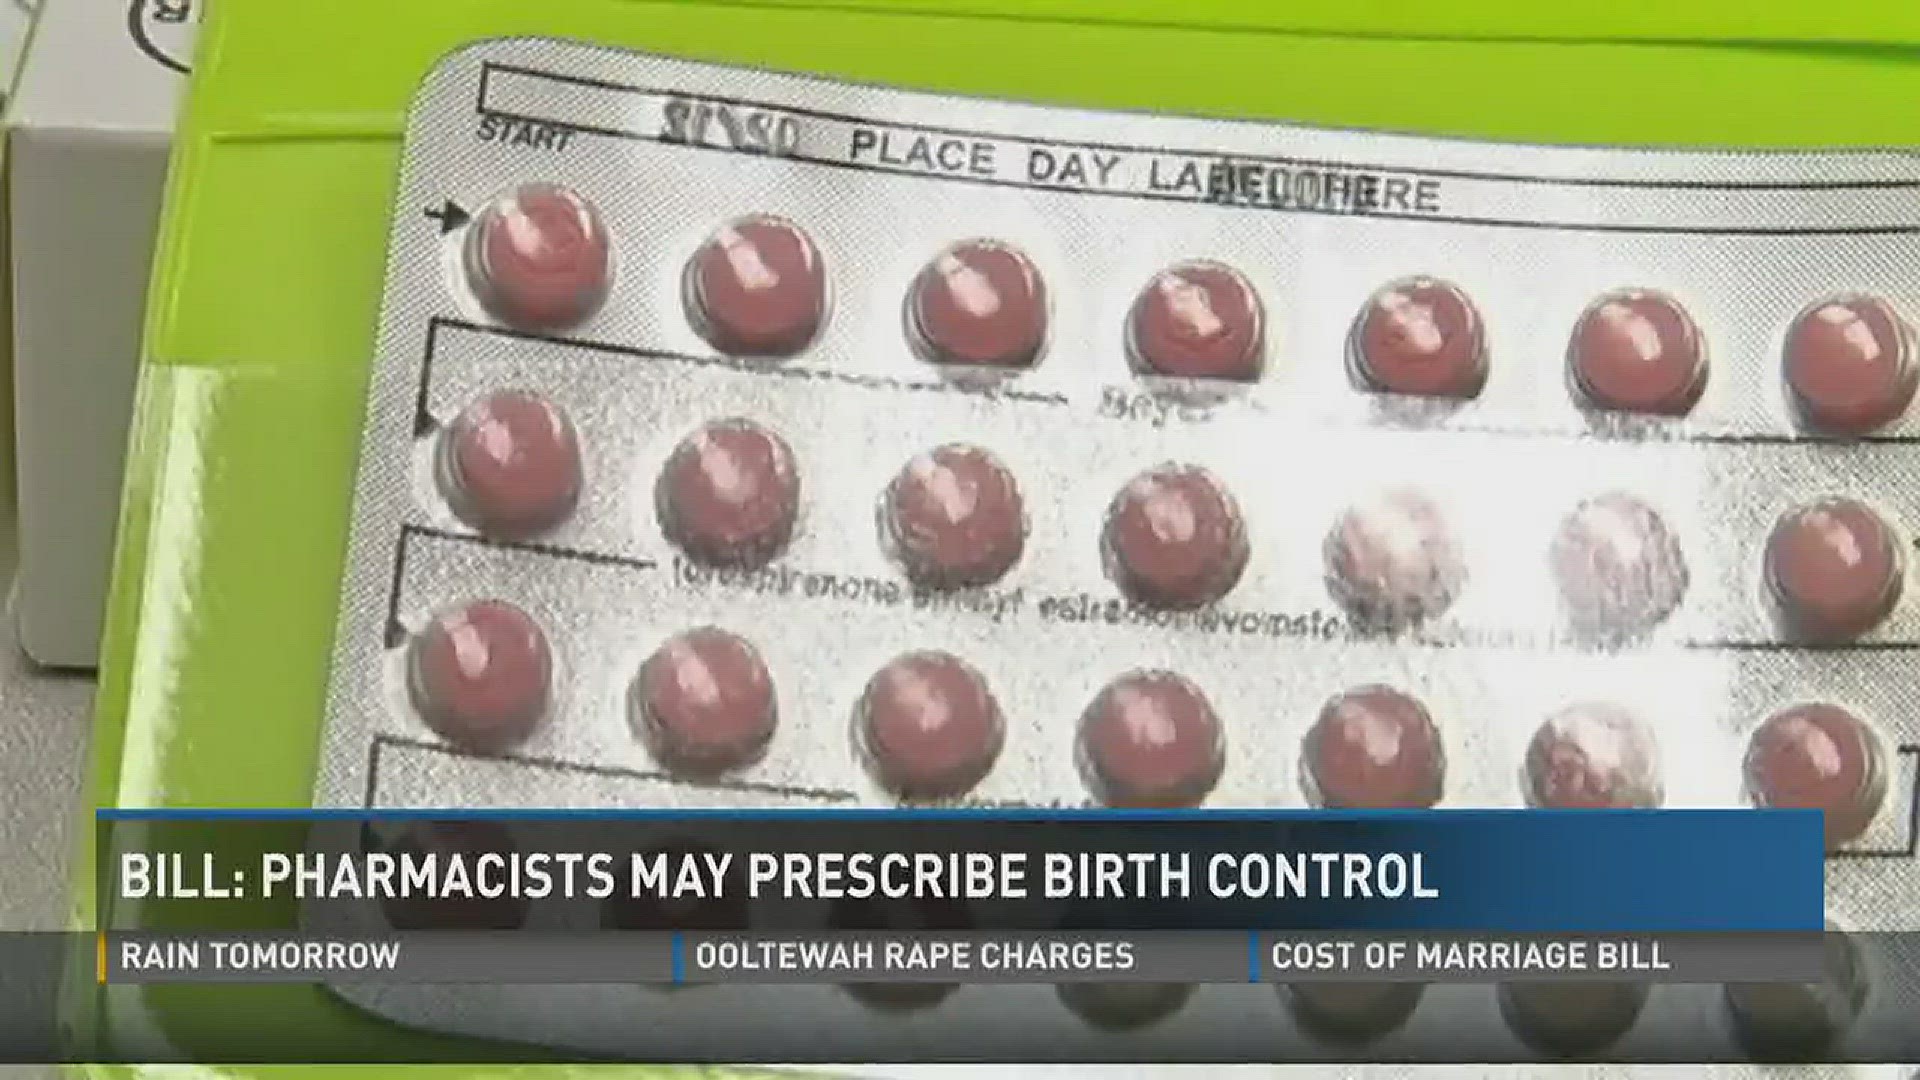 A proposed bill would allow pharmacists to prescribe birth control for women. Jan. 14, 2016